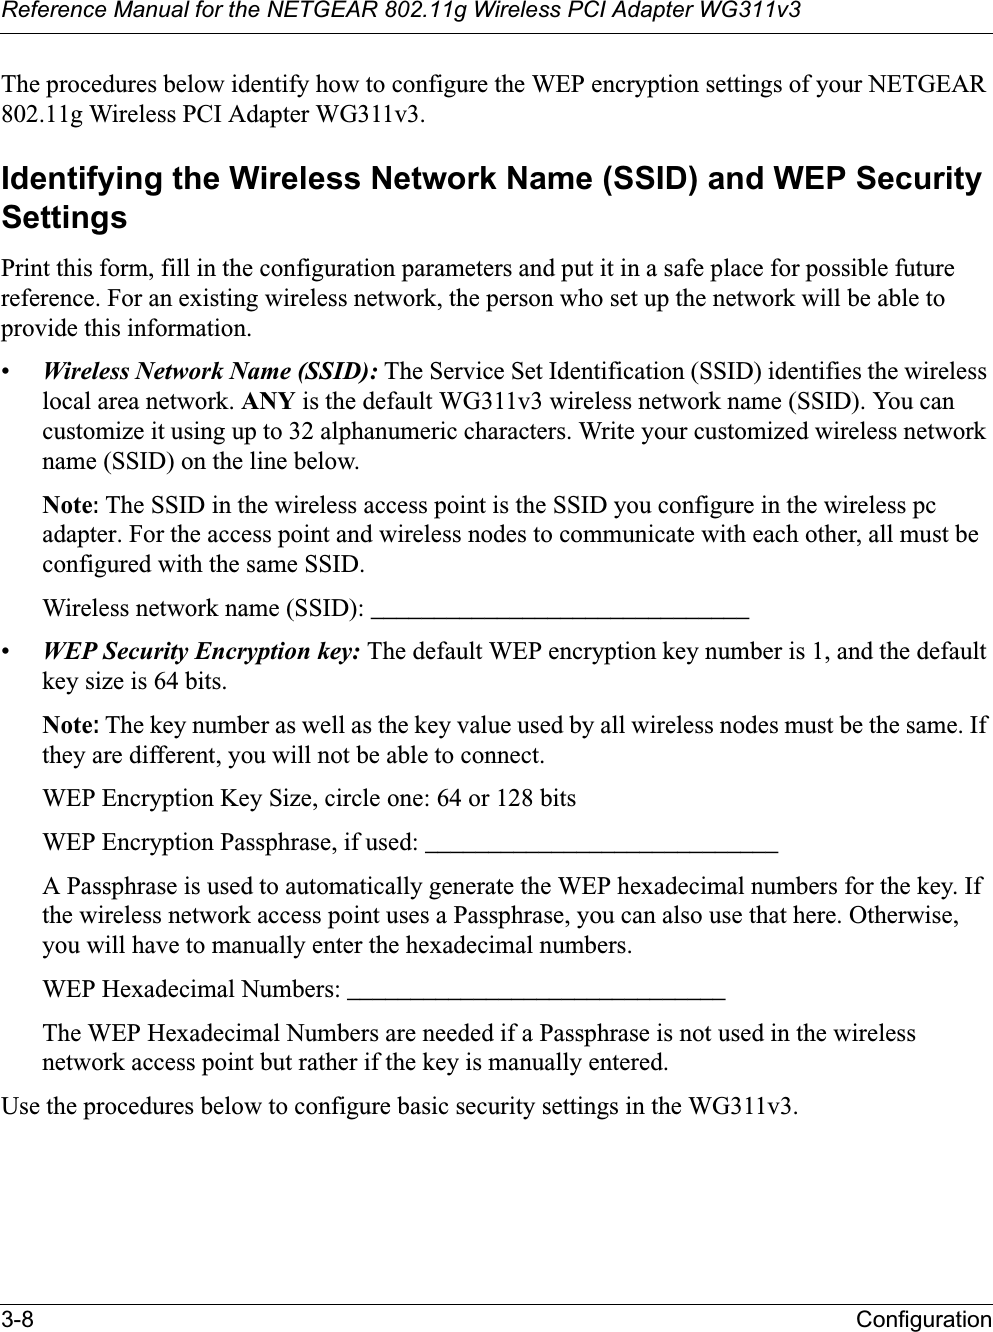 Reference Manual for the NETGEAR 802.11g Wireless PCI Adapter WG311v33-8 ConfigurationThe procedures below identify how to configure the WEP encryption settings of your NETGEAR 802.11g Wireless PCI Adapter WG311v3.Identifying the Wireless Network Name (SSID) and WEP Security SettingsPrint this form, fill in the configuration parameters and put it in a safe place for possible future reference. For an existing wireless network, the person who set up the network will be able to provide this information.•Wireless Network Name (SSID): The Service Set Identification (SSID) identifies the wireless local area network. ANY is the default WG311v3 wireless network name (SSID). You cancustomize it using up to 32 alphanumeric characters. Write your customized wireless network name (SSID) on the line below. Note: The SSID in the wireless access point is the SSID you configure in the wireless pc adapter. For the access point and wireless nodes to communicate with each other, all must be configured with the same SSID.Wireless network name (SSID): ______________________________ •WEP Security Encryption key: The default WEP encryption key number is 1, and the default key size is 64 bits.Note:The key number as well as the key value used by all wireless nodes must be the same. If they are different, you will not be able to connect.WEP Encryption Key Size, circle one: 64 or 128 bitsWEP Encryption Passphrase, if used: ____________________________ A Passphrase is used to automatically generate the WEP hexadecimal numbers for the key. If the wireless network access point uses a Passphrase, you can also use that here. Otherwise, you will have to manually enter the hexadecimal numbers.WEP Hexadecimal Numbers: ______________________________ The WEP Hexadecimal Numbers are needed if a Passphrase is not used in the wireless network access point but rather if the key is manually entered.Use the procedures below to configure basic security settings in the WG311v3.